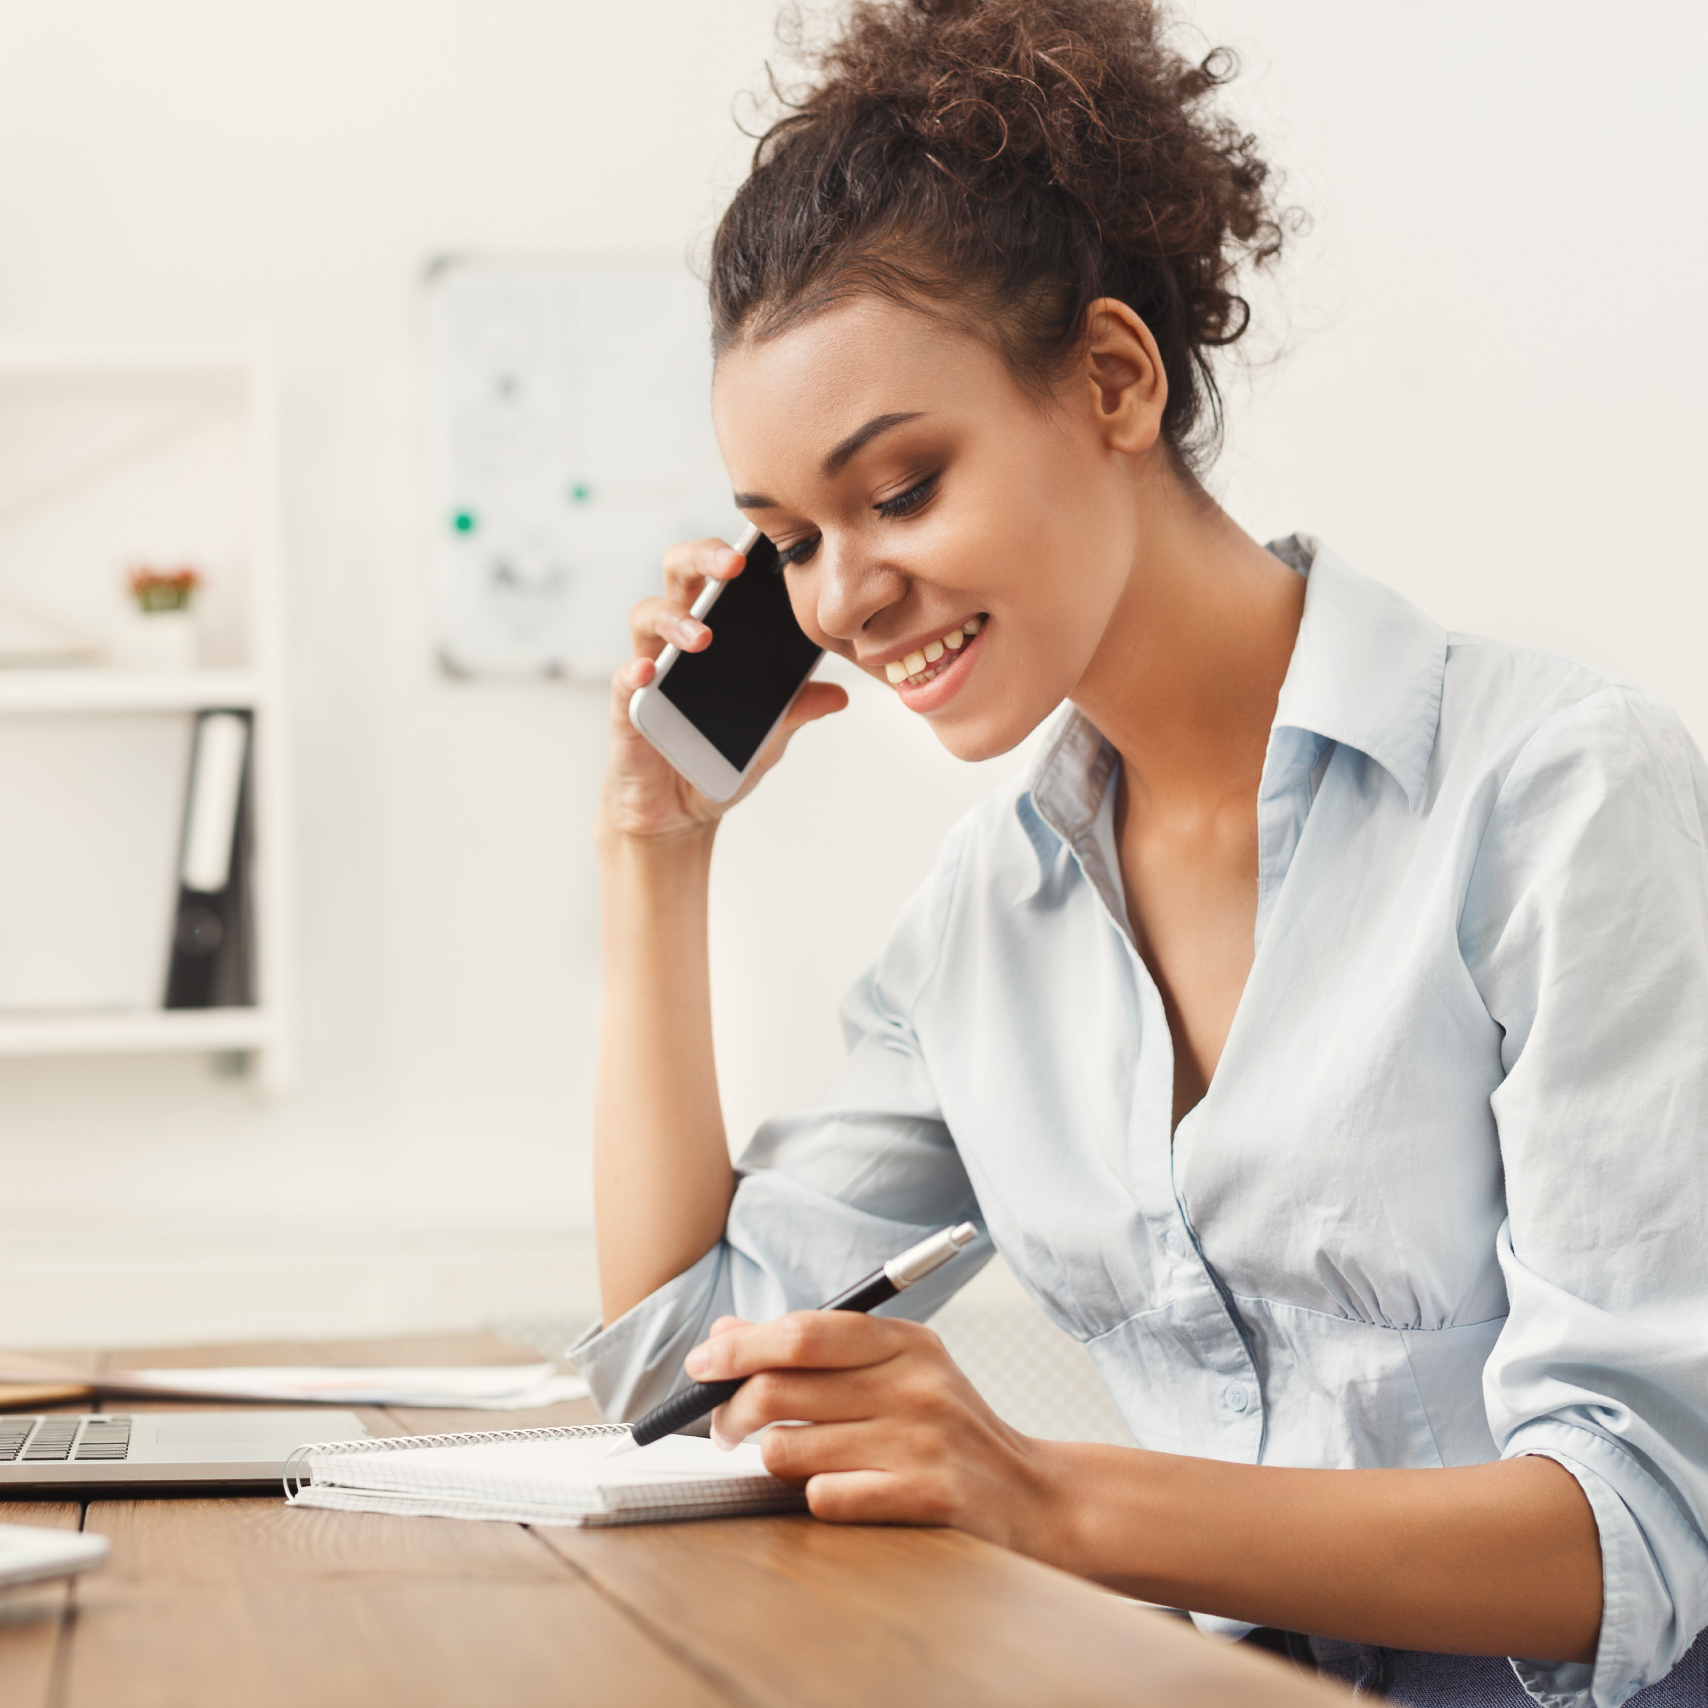 woman on the phone looking relieved